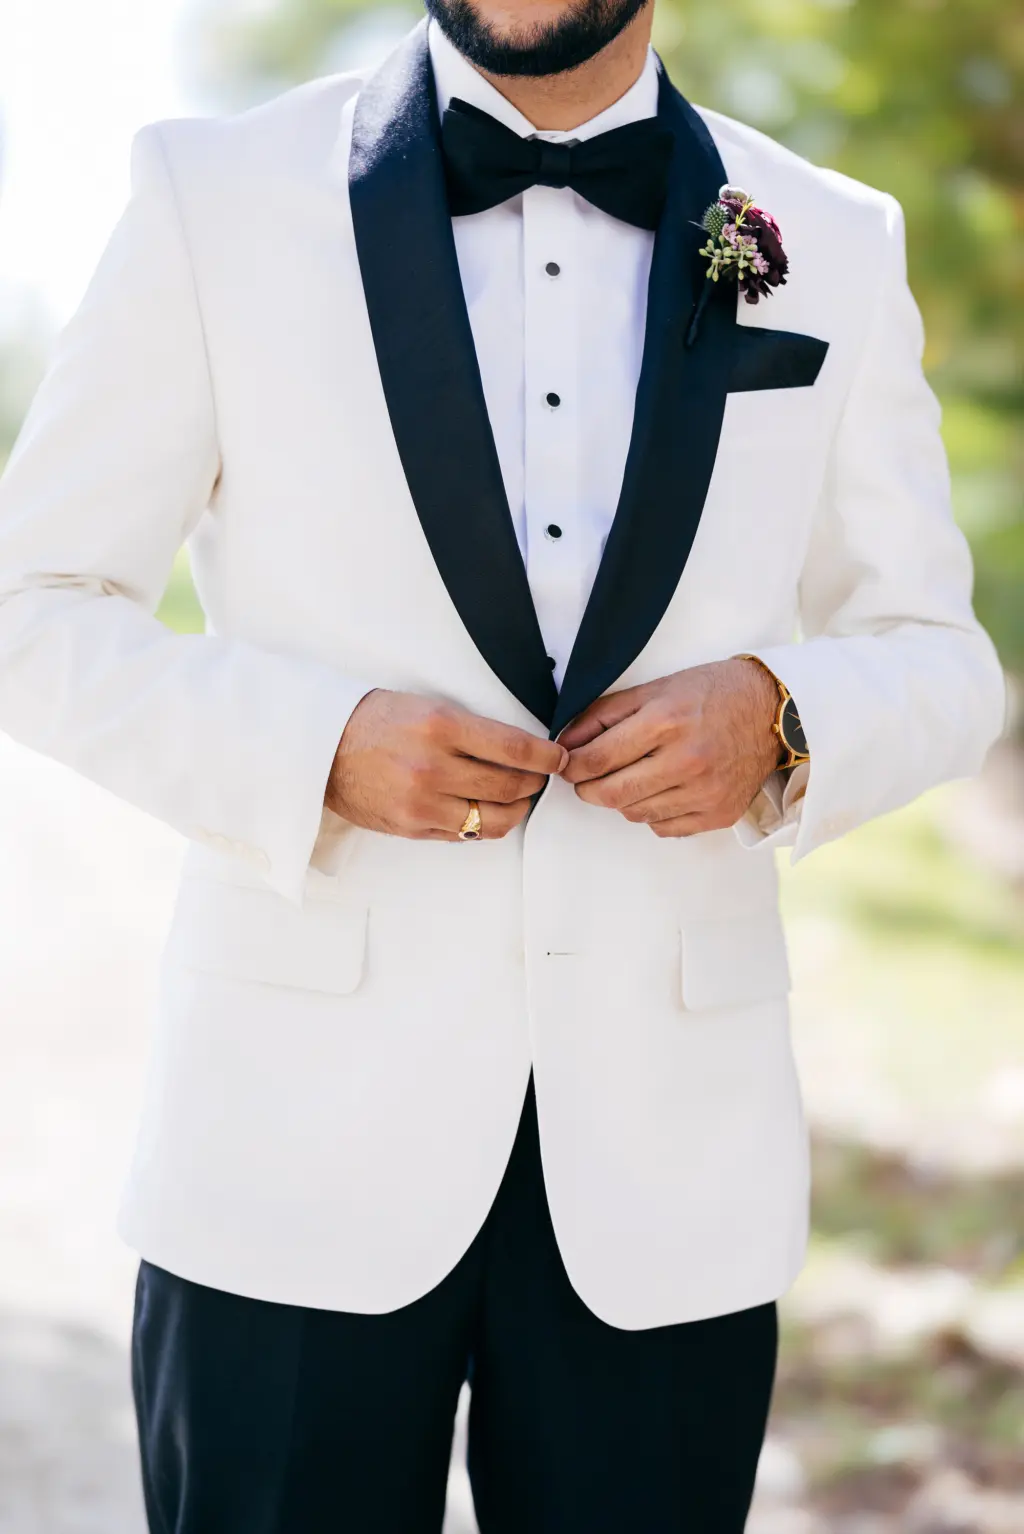 Black and White Tuxedo Jacket with Satin Lapel and Bow Tie Ideas